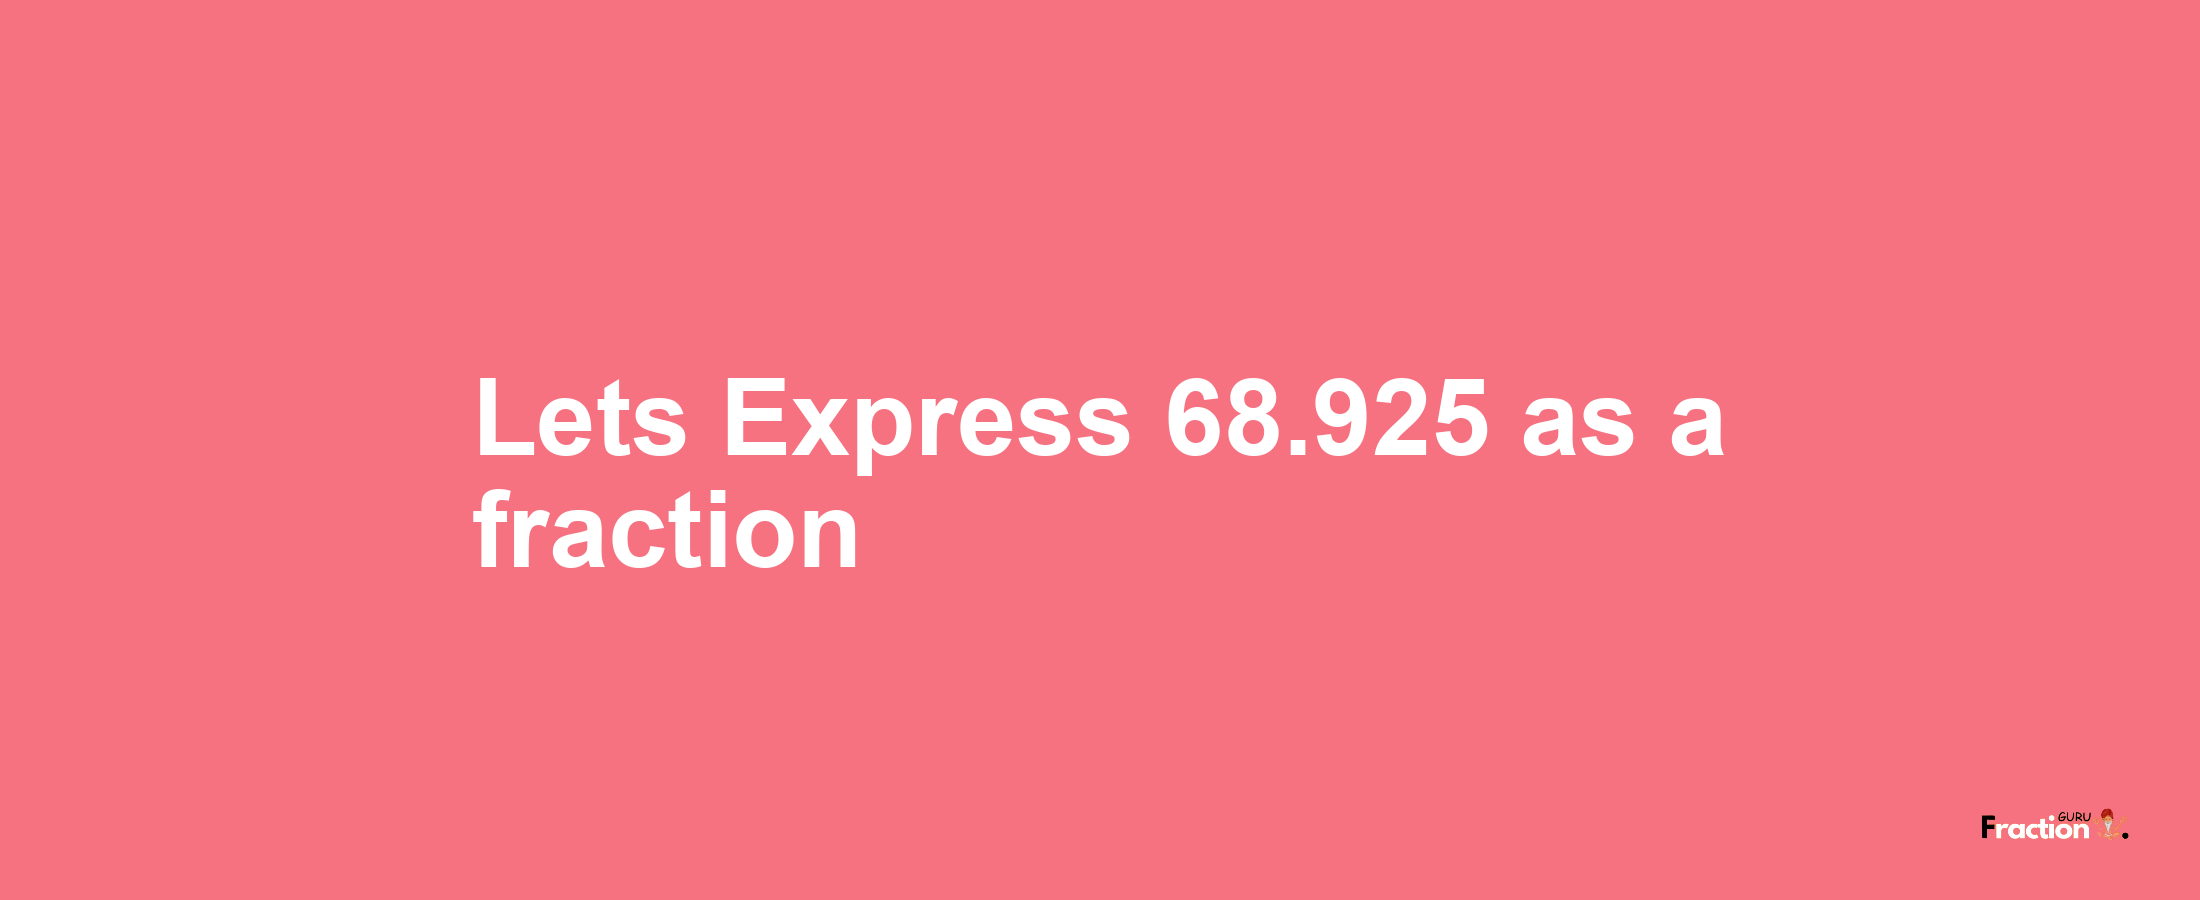 Lets Express 68.925 as afraction